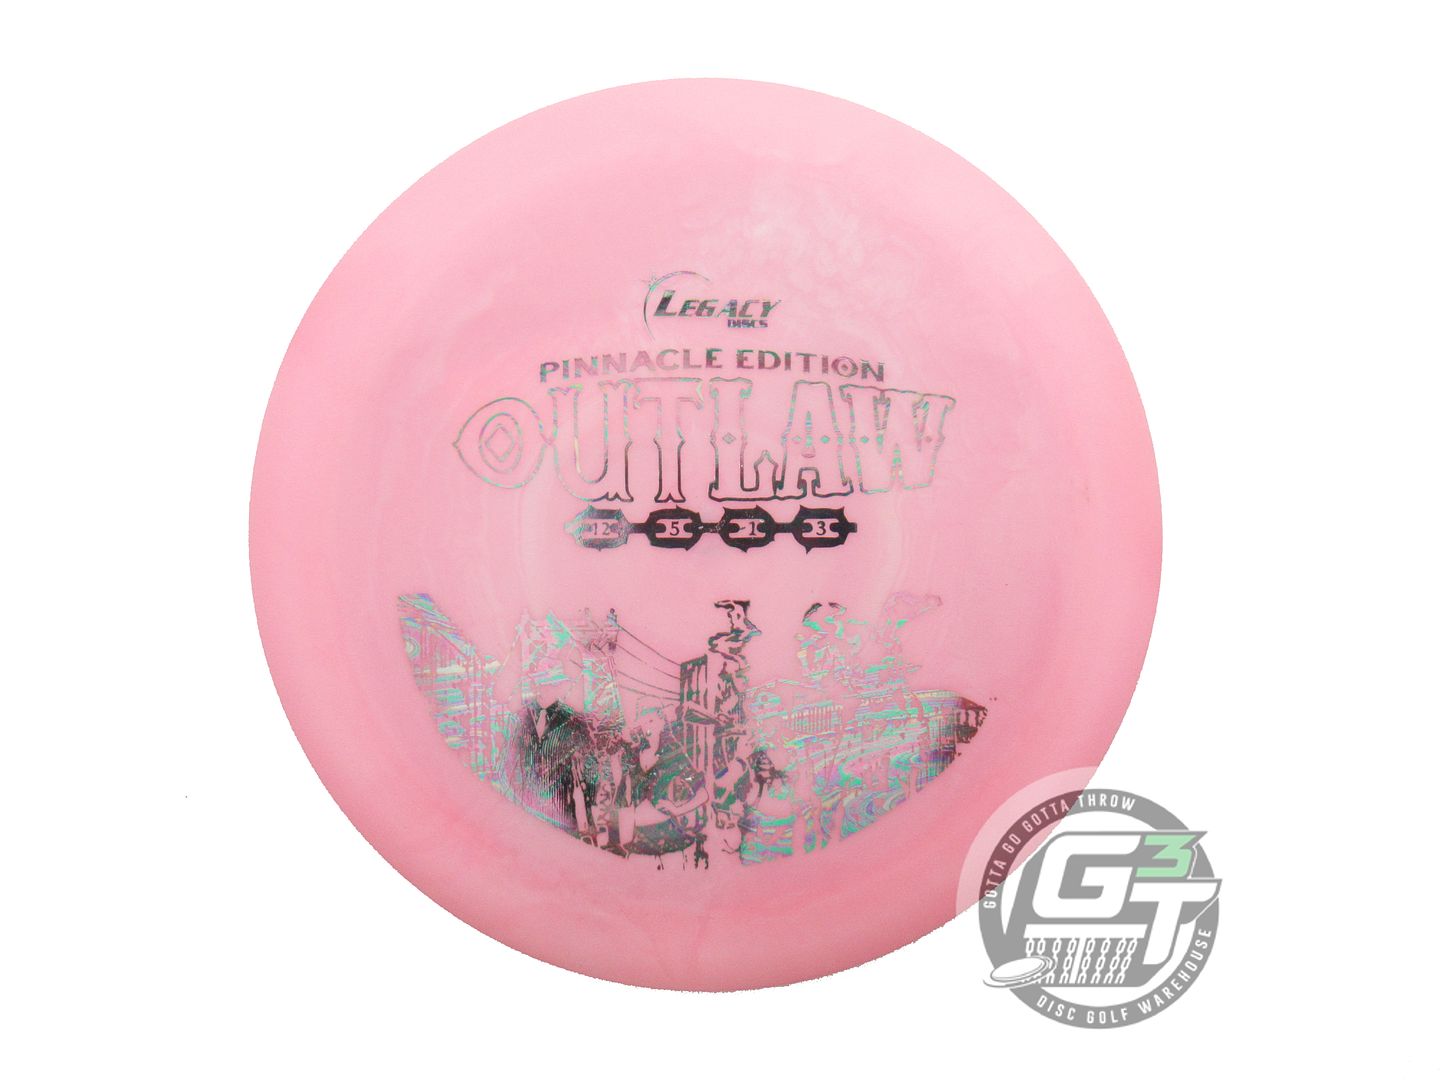 Legacy Pinnacle Edition Outlaw Distance Driver Golf Disc (Individually Listed)